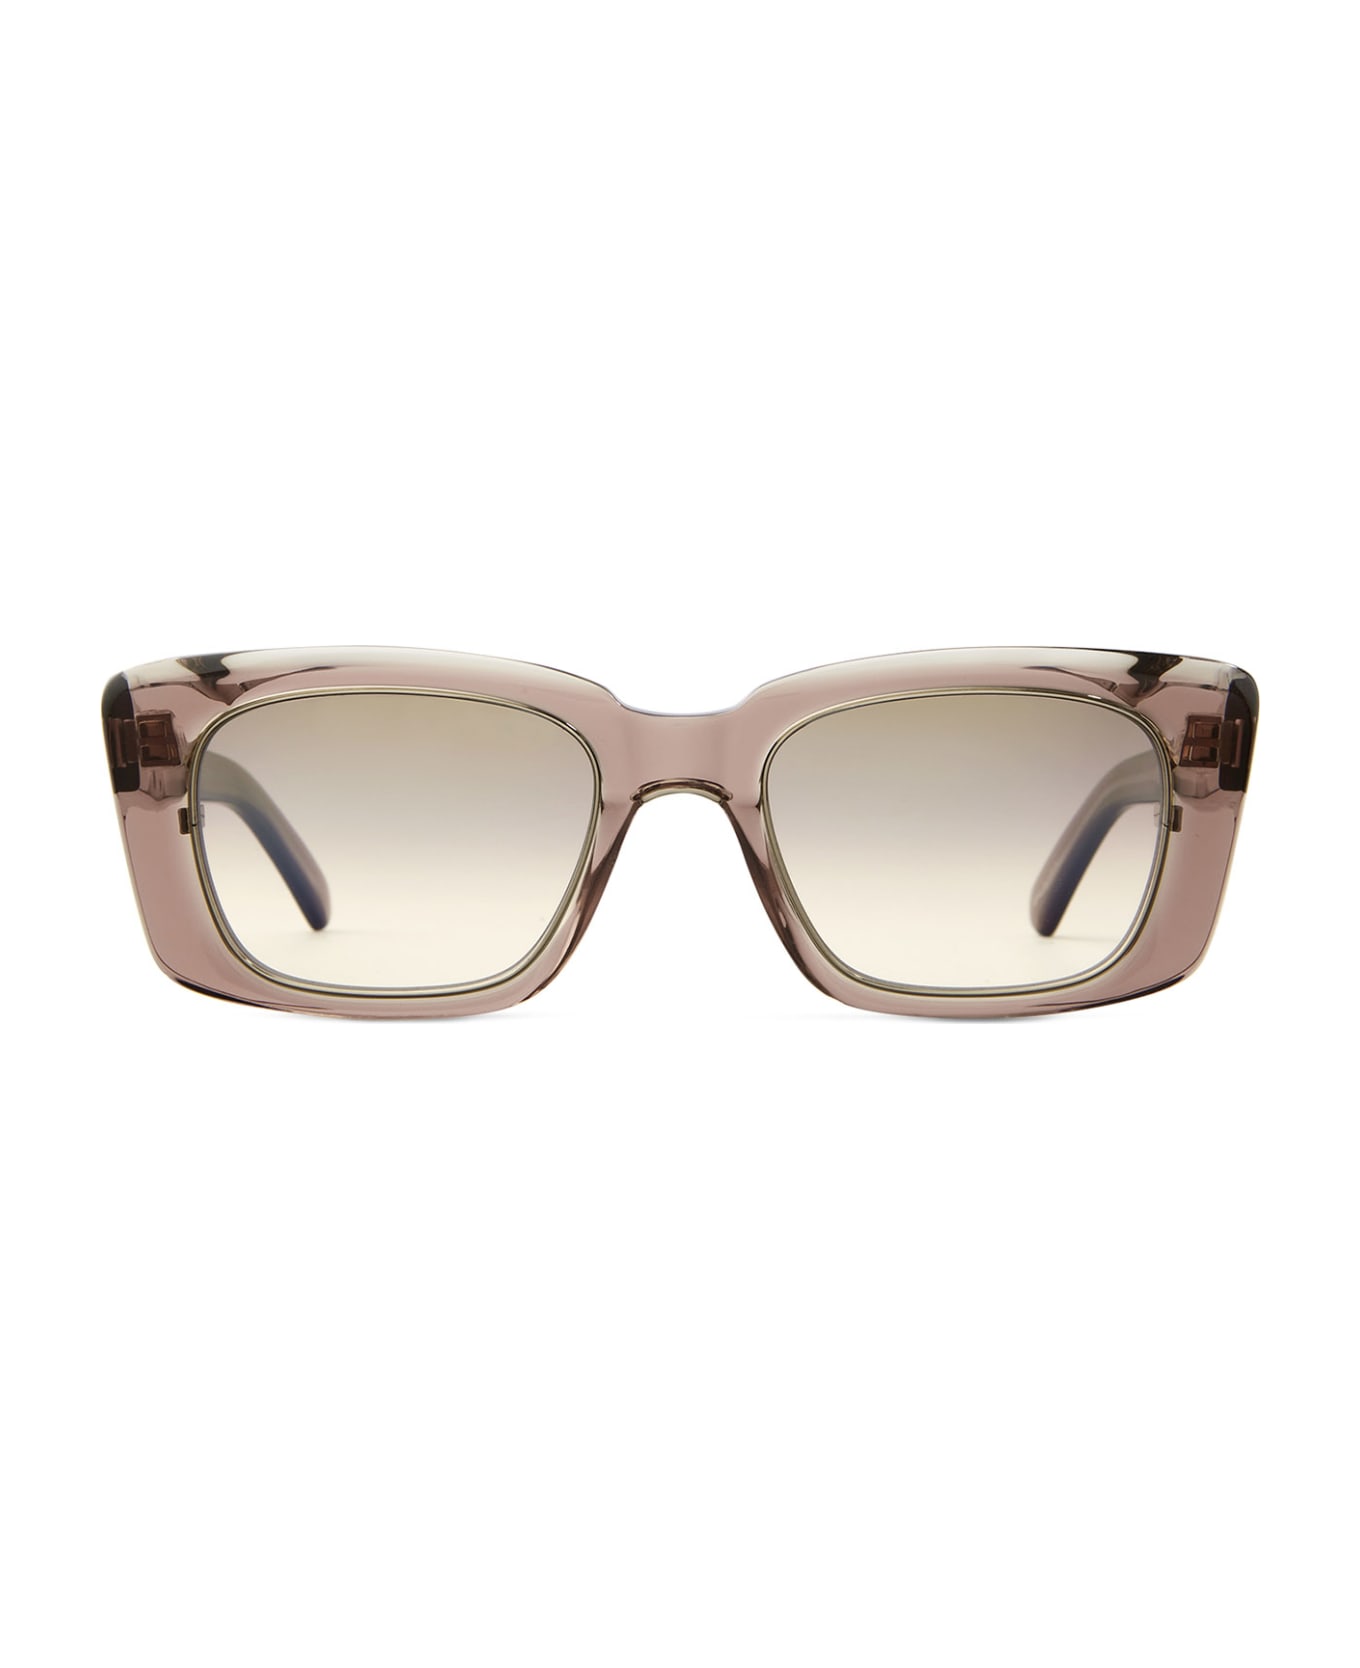 Mr. Leight Carman S Rose Clay-12k White Gold Sunglasses - Rose Clay-12K White Gold